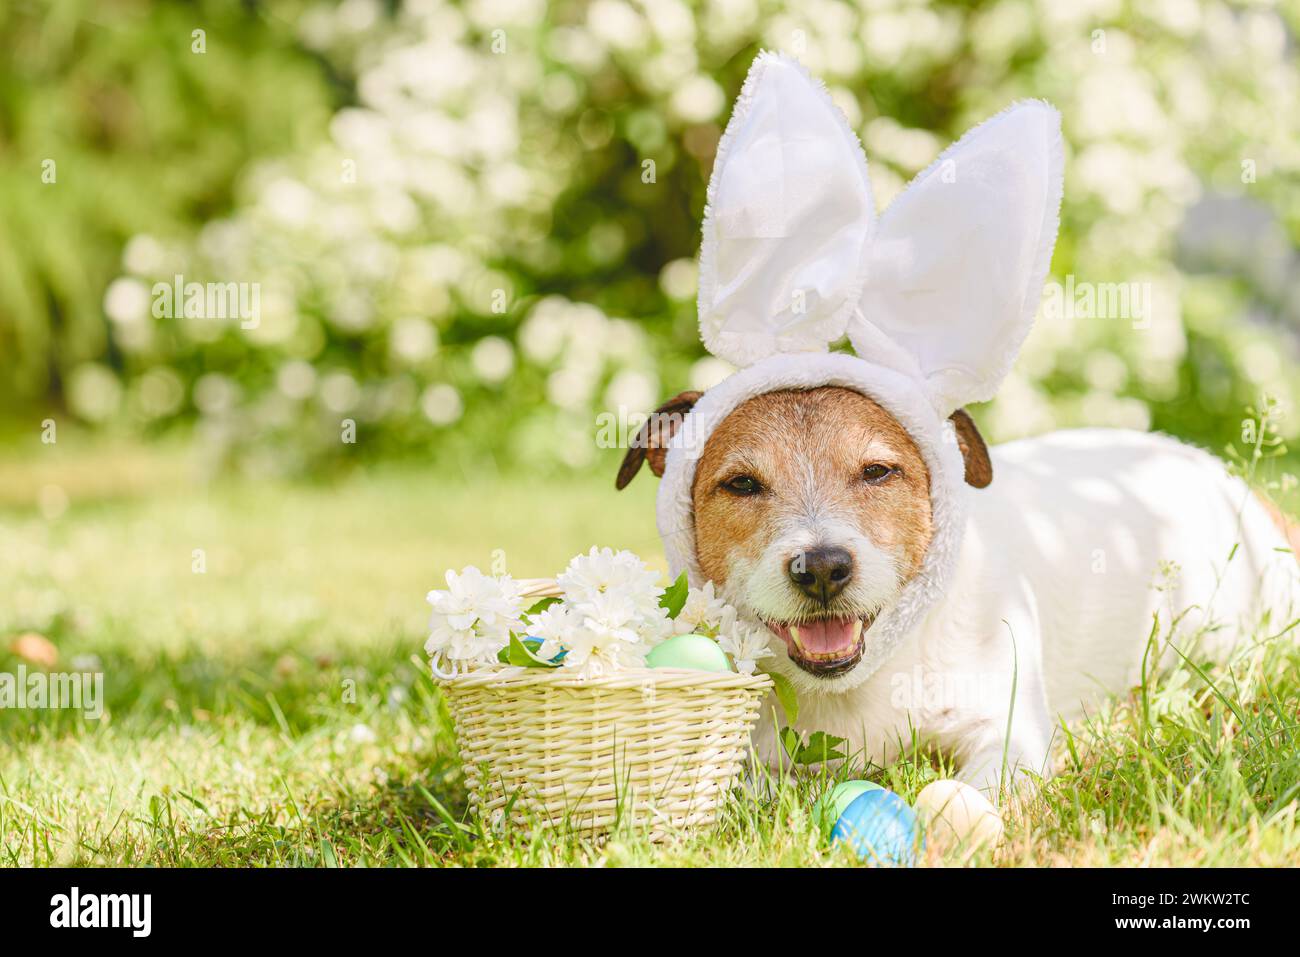 Funny dog with Easter bunny ears, dyed Easter eggs in grass and white flowers in basket Stock Photo